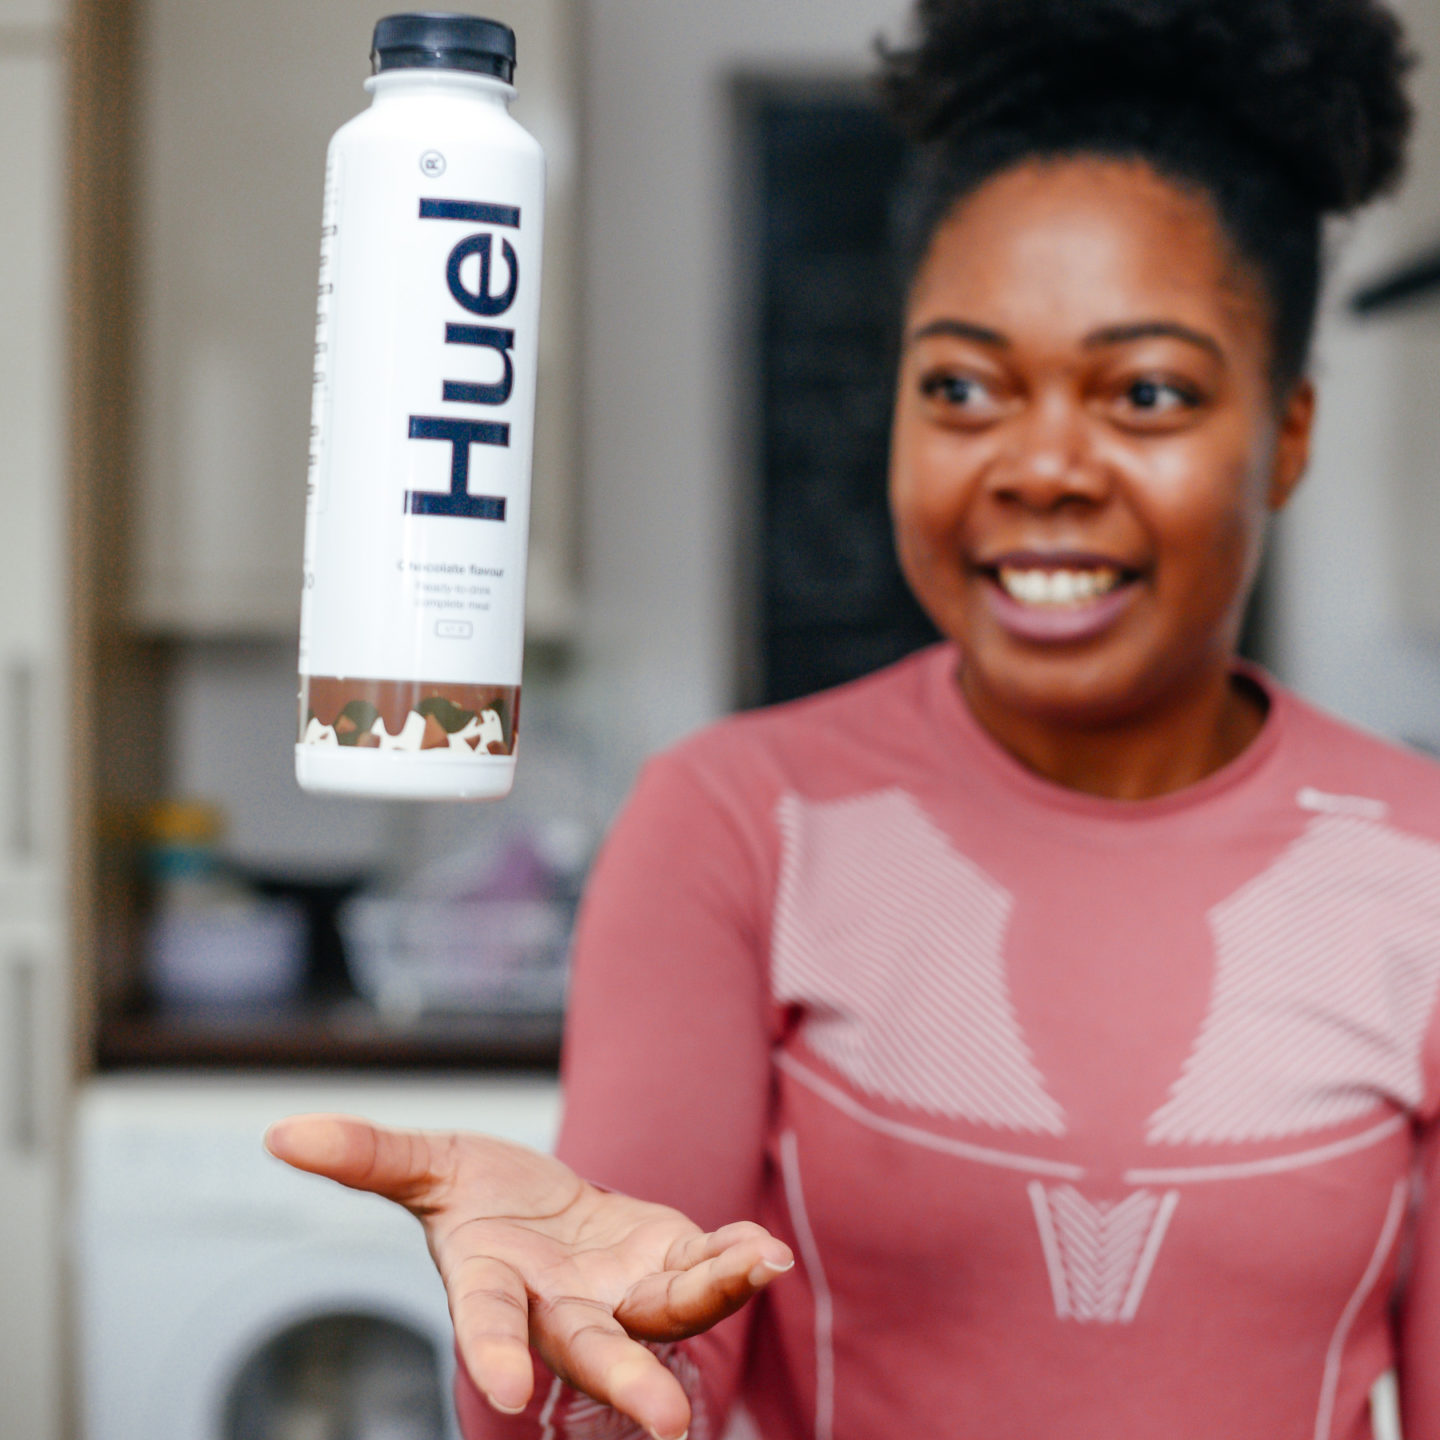 Huel For Runners - Complete Nutrition in a Drink